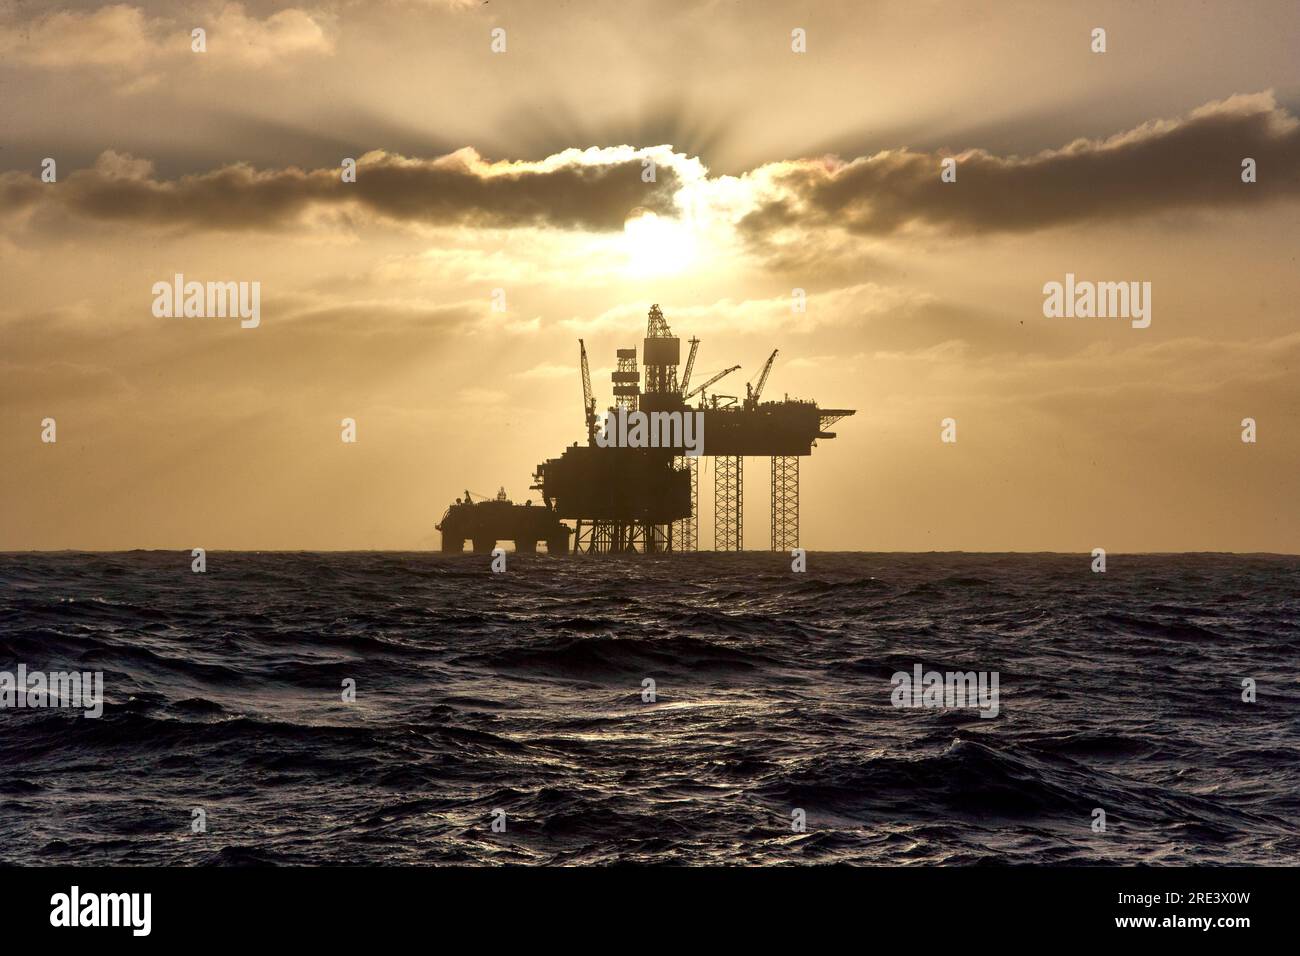 iSilhouette of a jack up drilling rig in the North Sea at sunset. North sea offshore platform for oil and gas. Stock Photo